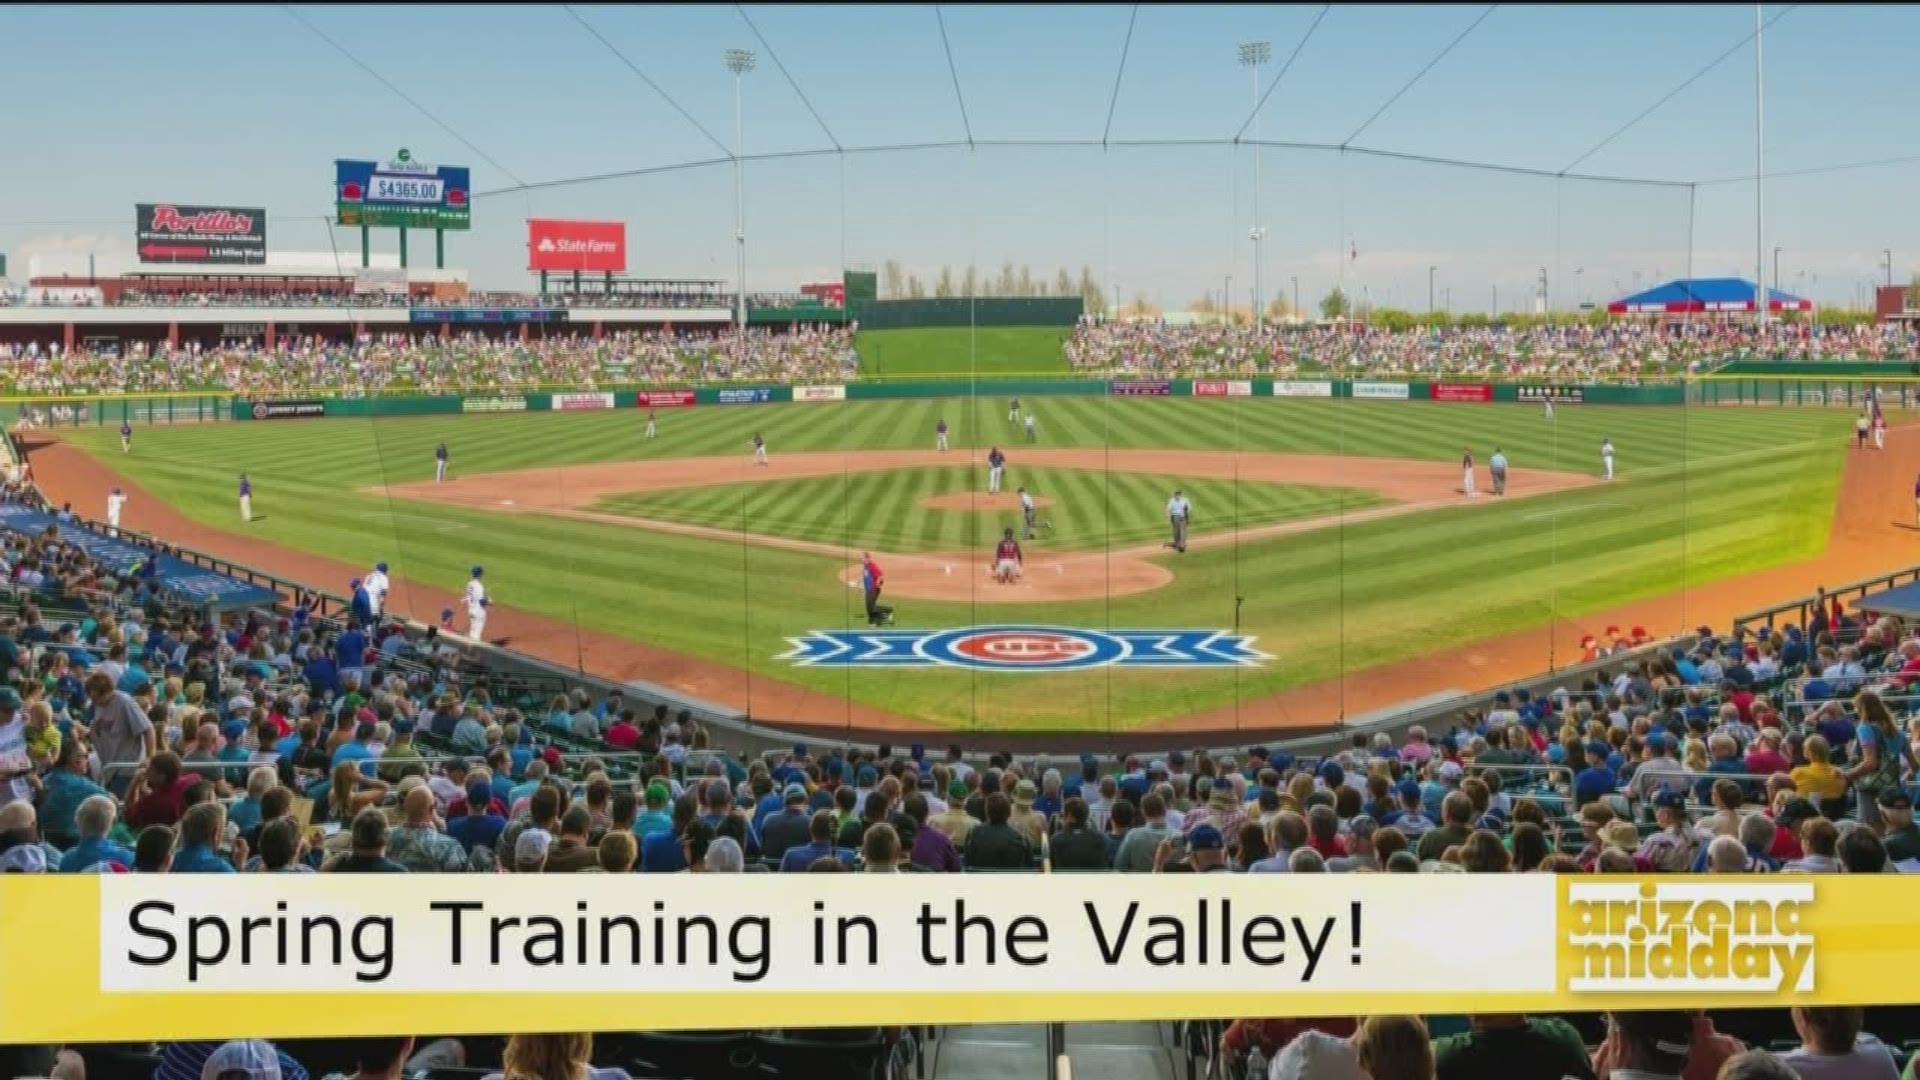 Spring training season is right around the corner, and Becky with Visit Arizona gives us the scoop!